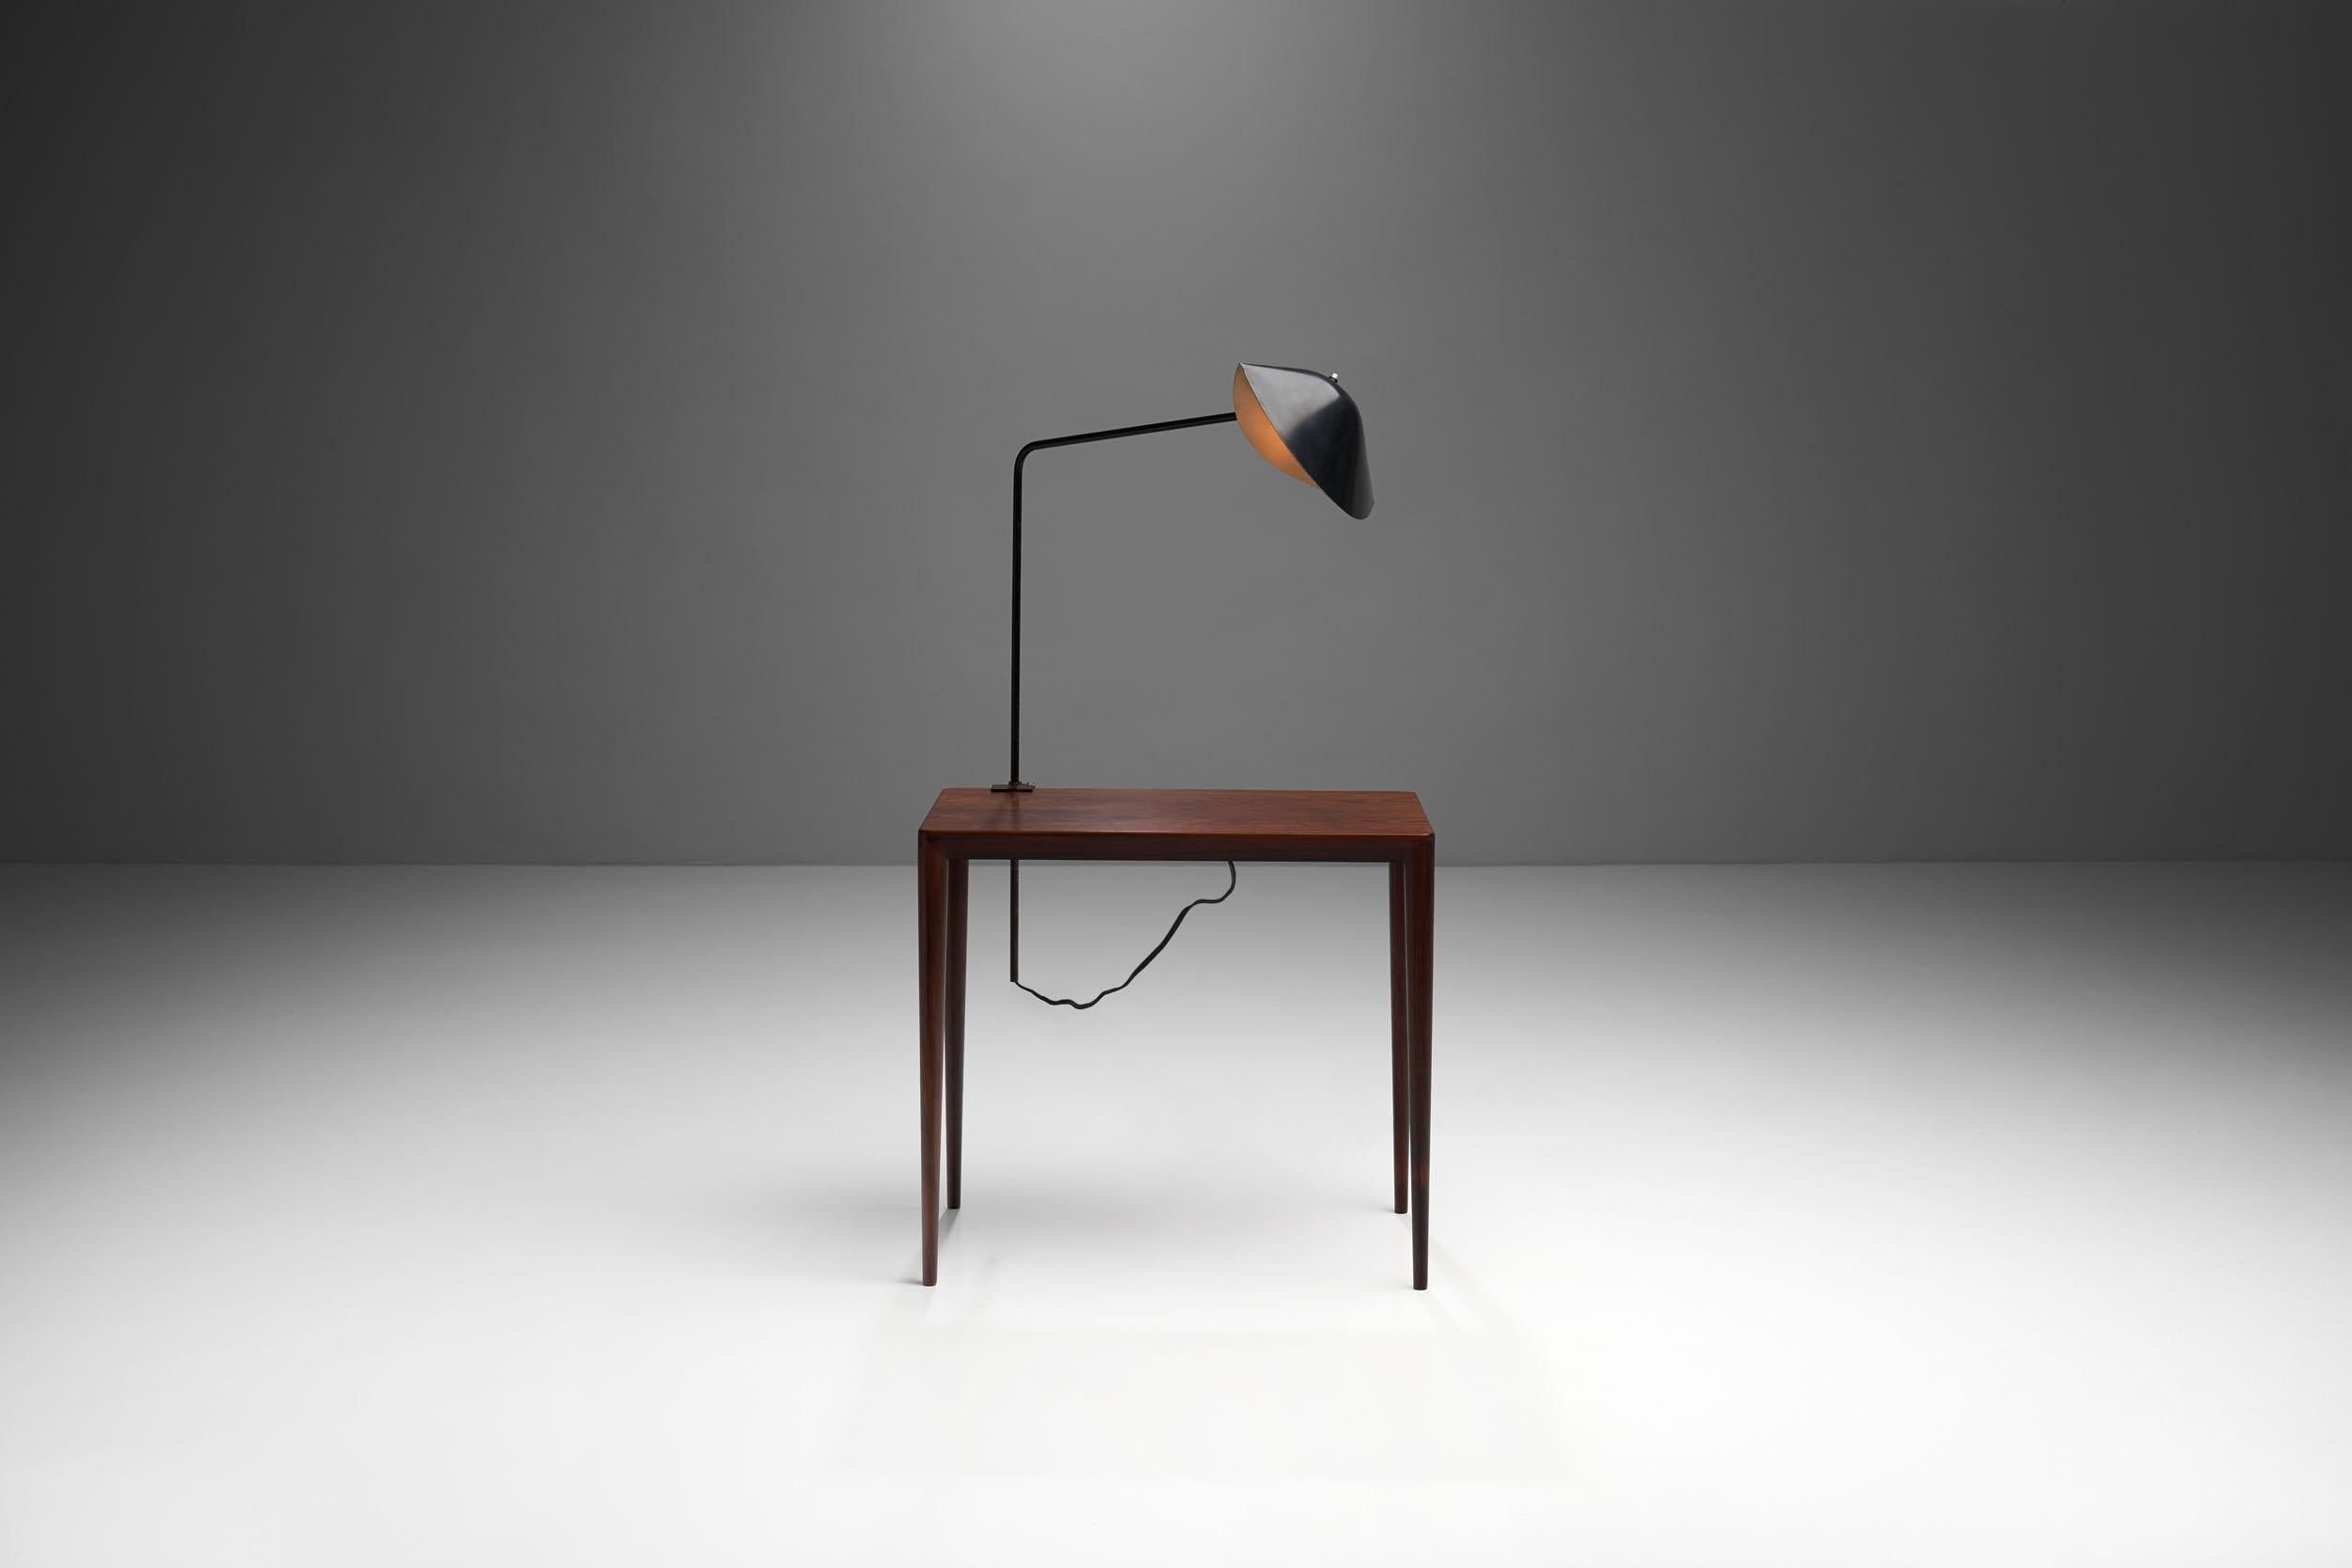 The 'Agrafée simple' desk lamp was designed by Serge Mouille in France, 1957. This clean and timeless Classic of modern design has a black steel structure and an aluminum shade with a black lacquer coating, which is folded into an organic conical